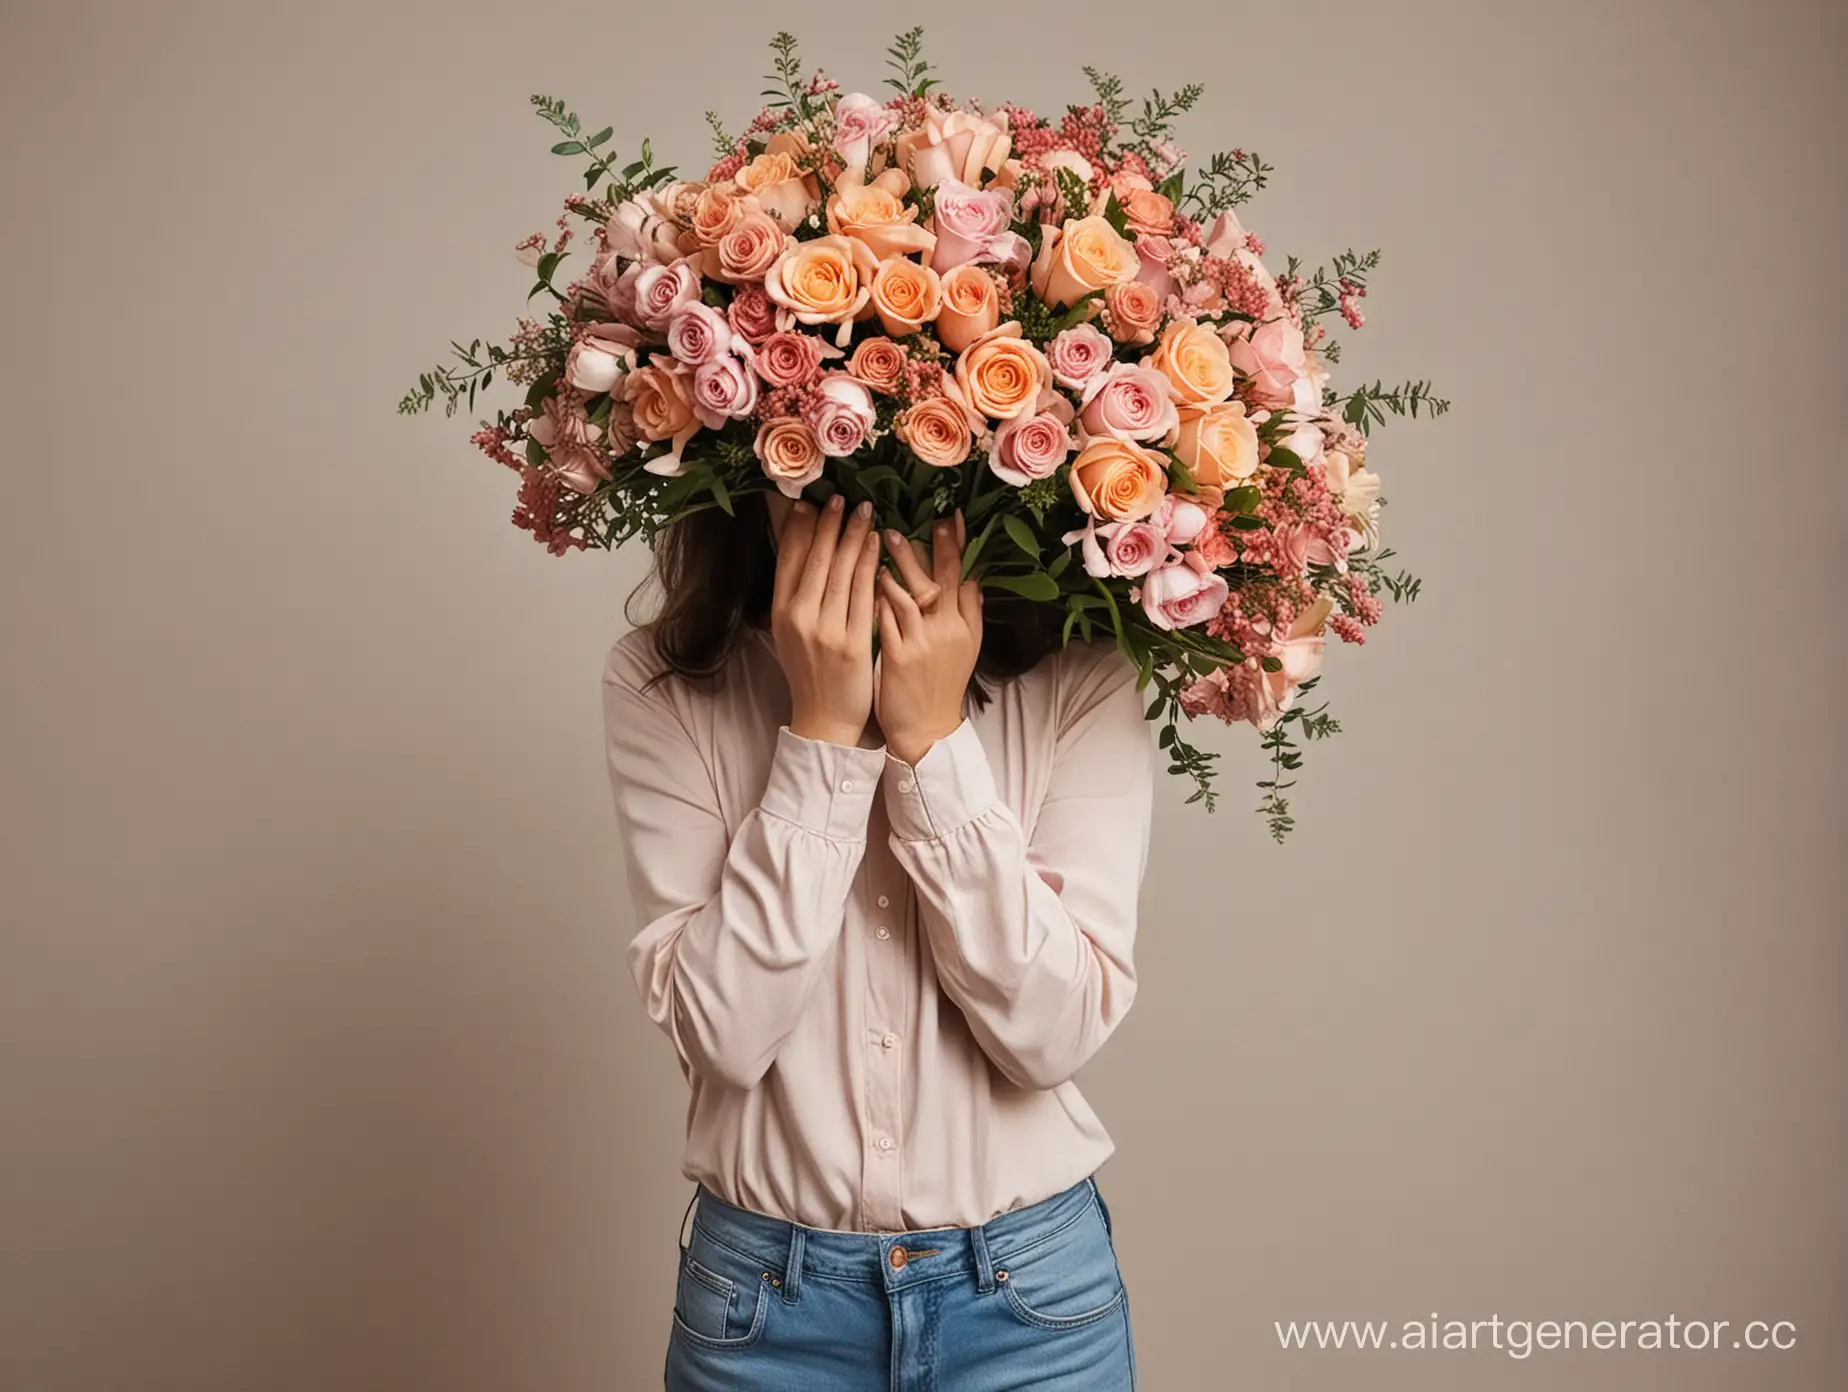 Girl-Holding-Expensive-Bouquet-of-Flowers